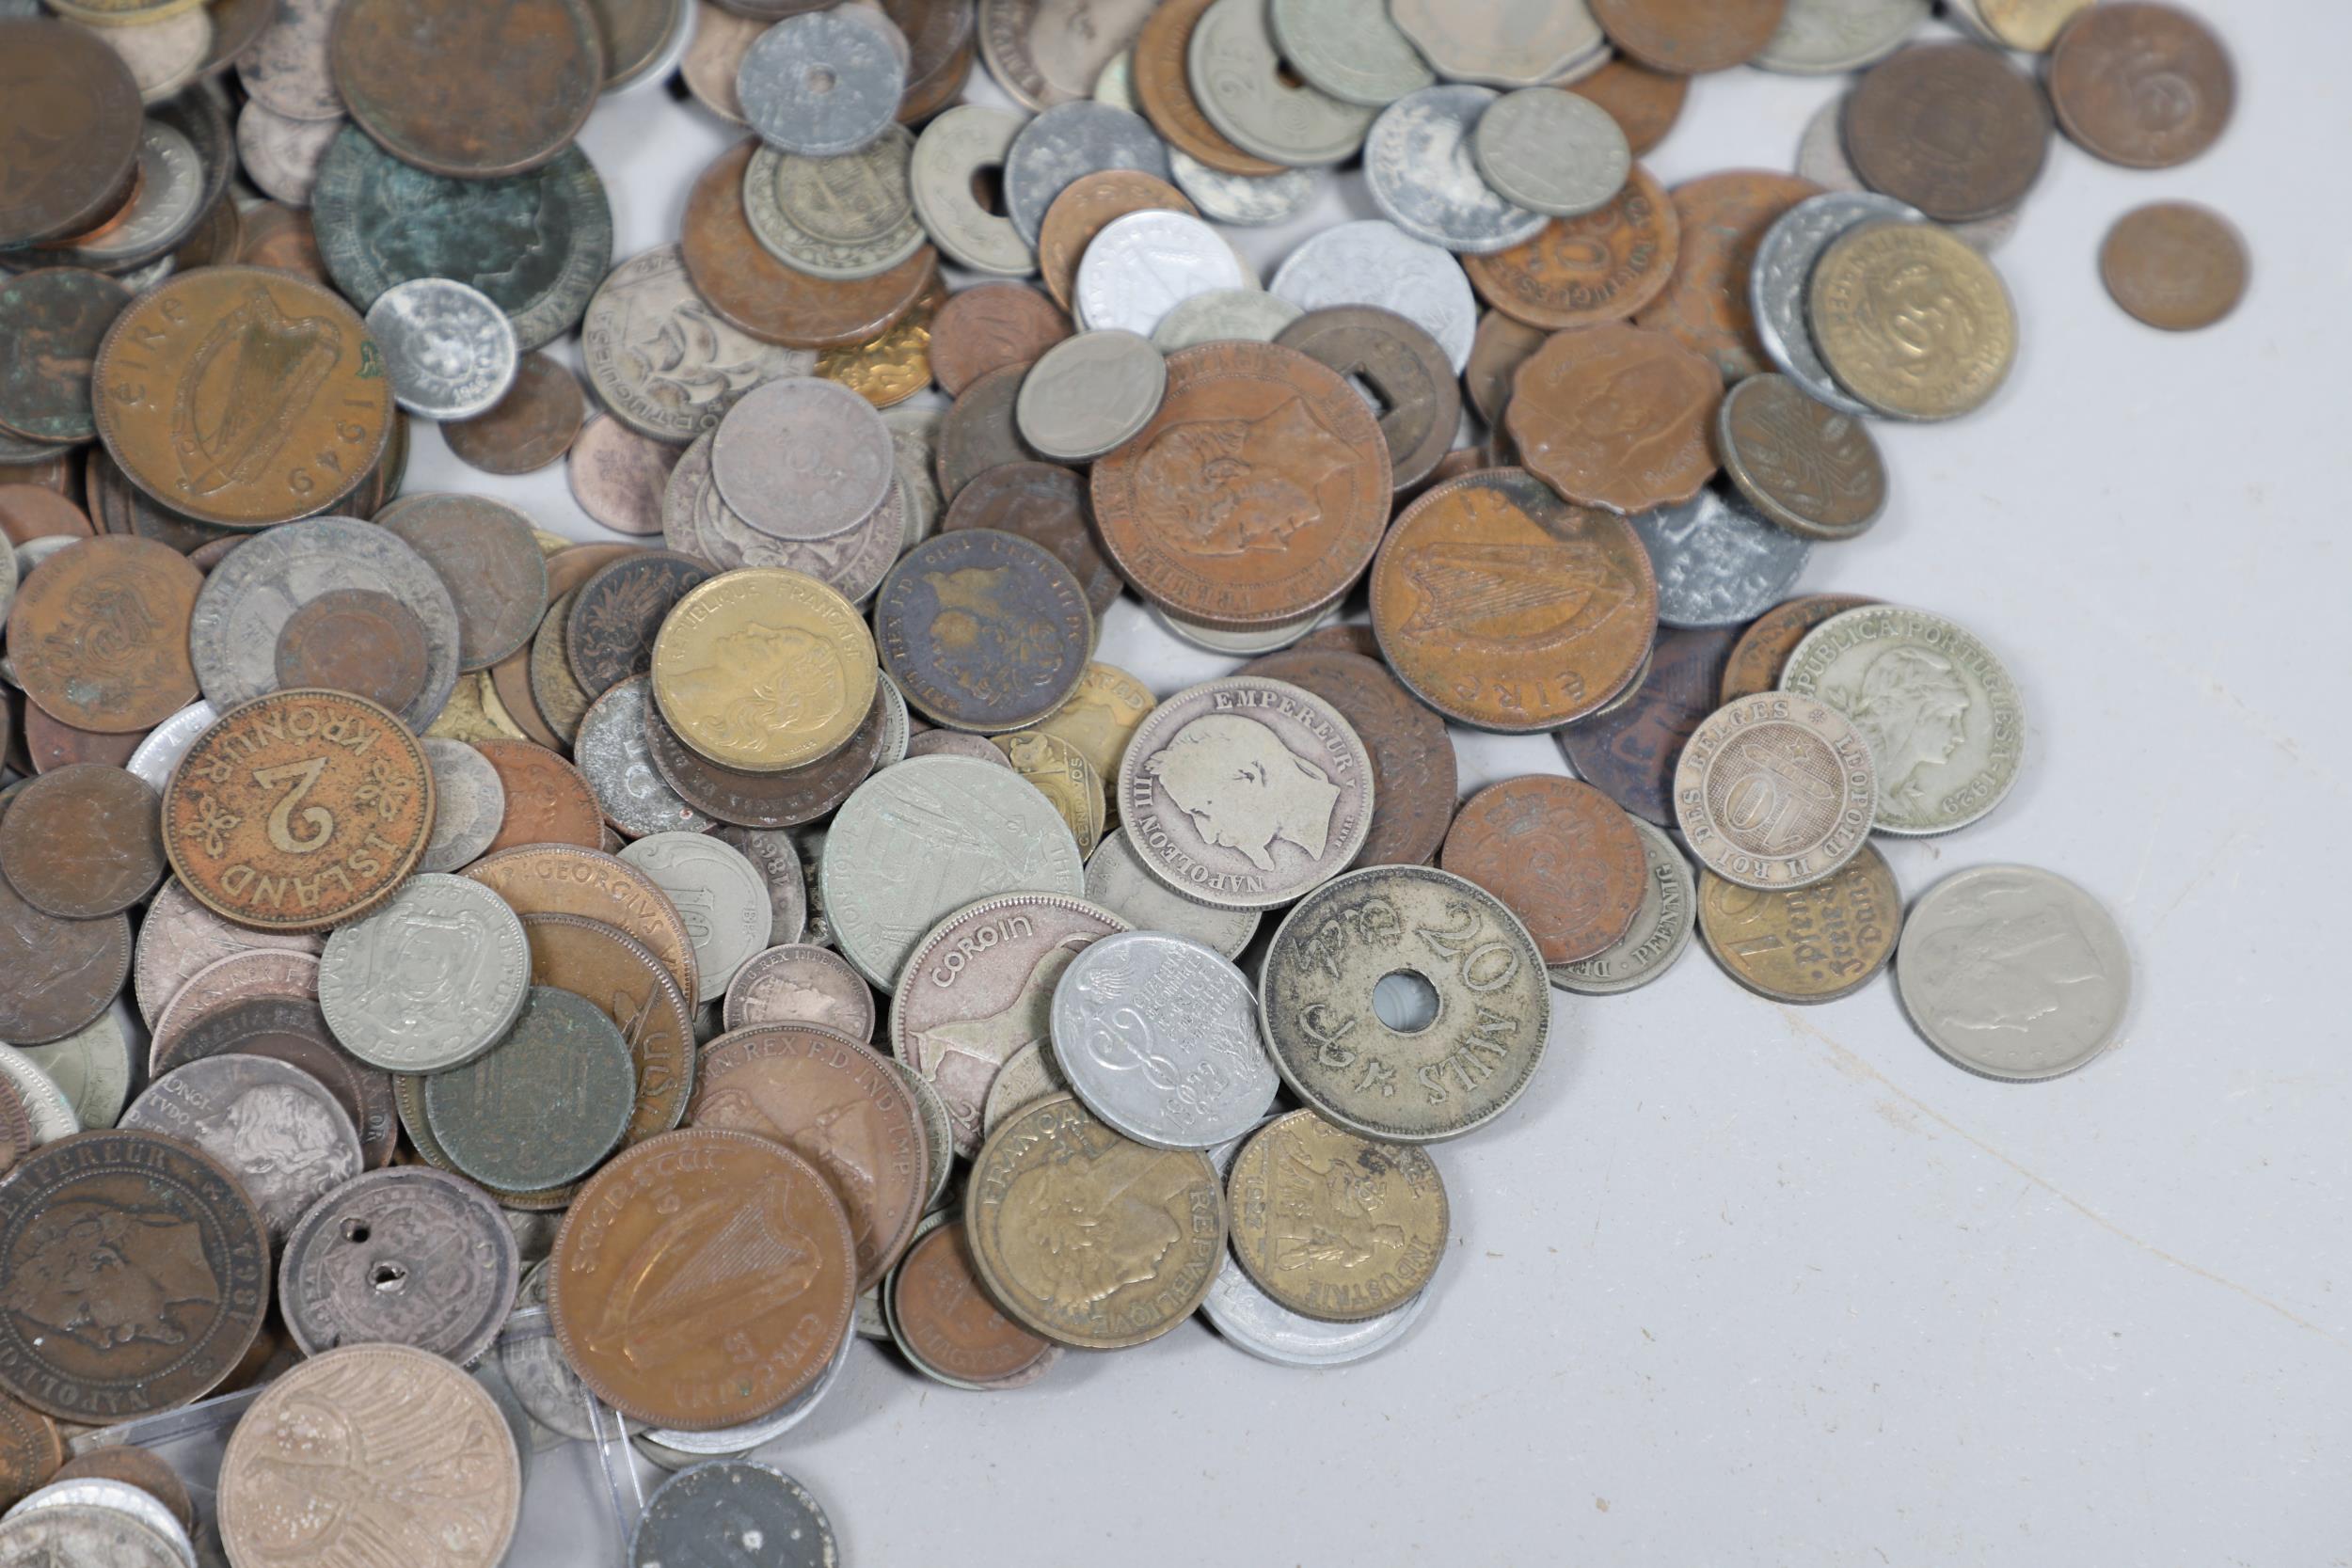 A LARGE COLLECTION OF WORLD COINS AND SIMILAR BRITISH COINS. - Image 12 of 20